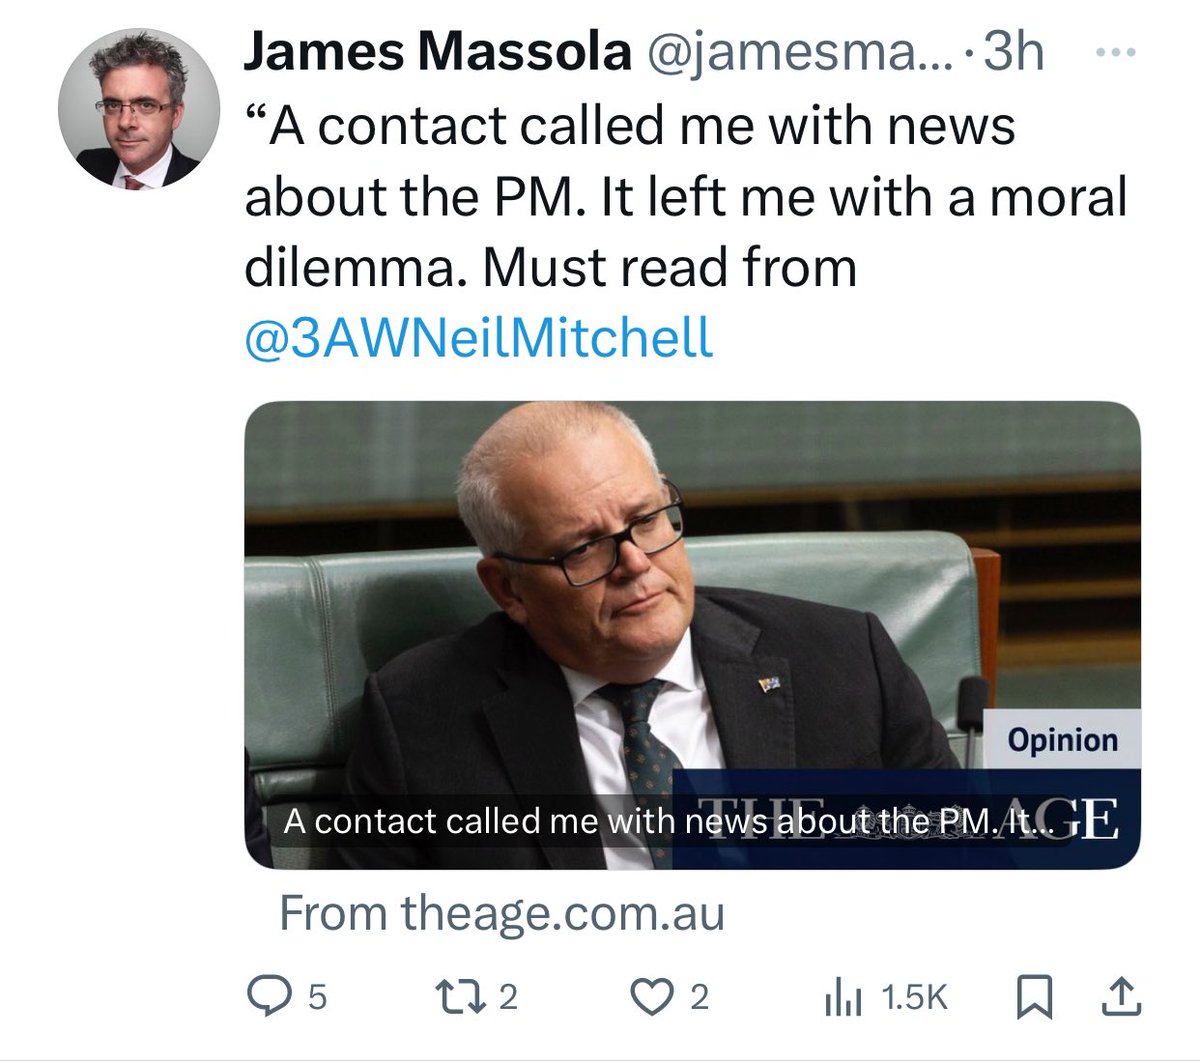 I see James Massola is pulling out all the stops in an attempt to remediate the reputation of Morrison. No part of his limited journalistic credibility is left unscathed - I guess it’s payback for his time as Morrison’s “exclusive” stenographer #auspol #ThisIsNotJournalism